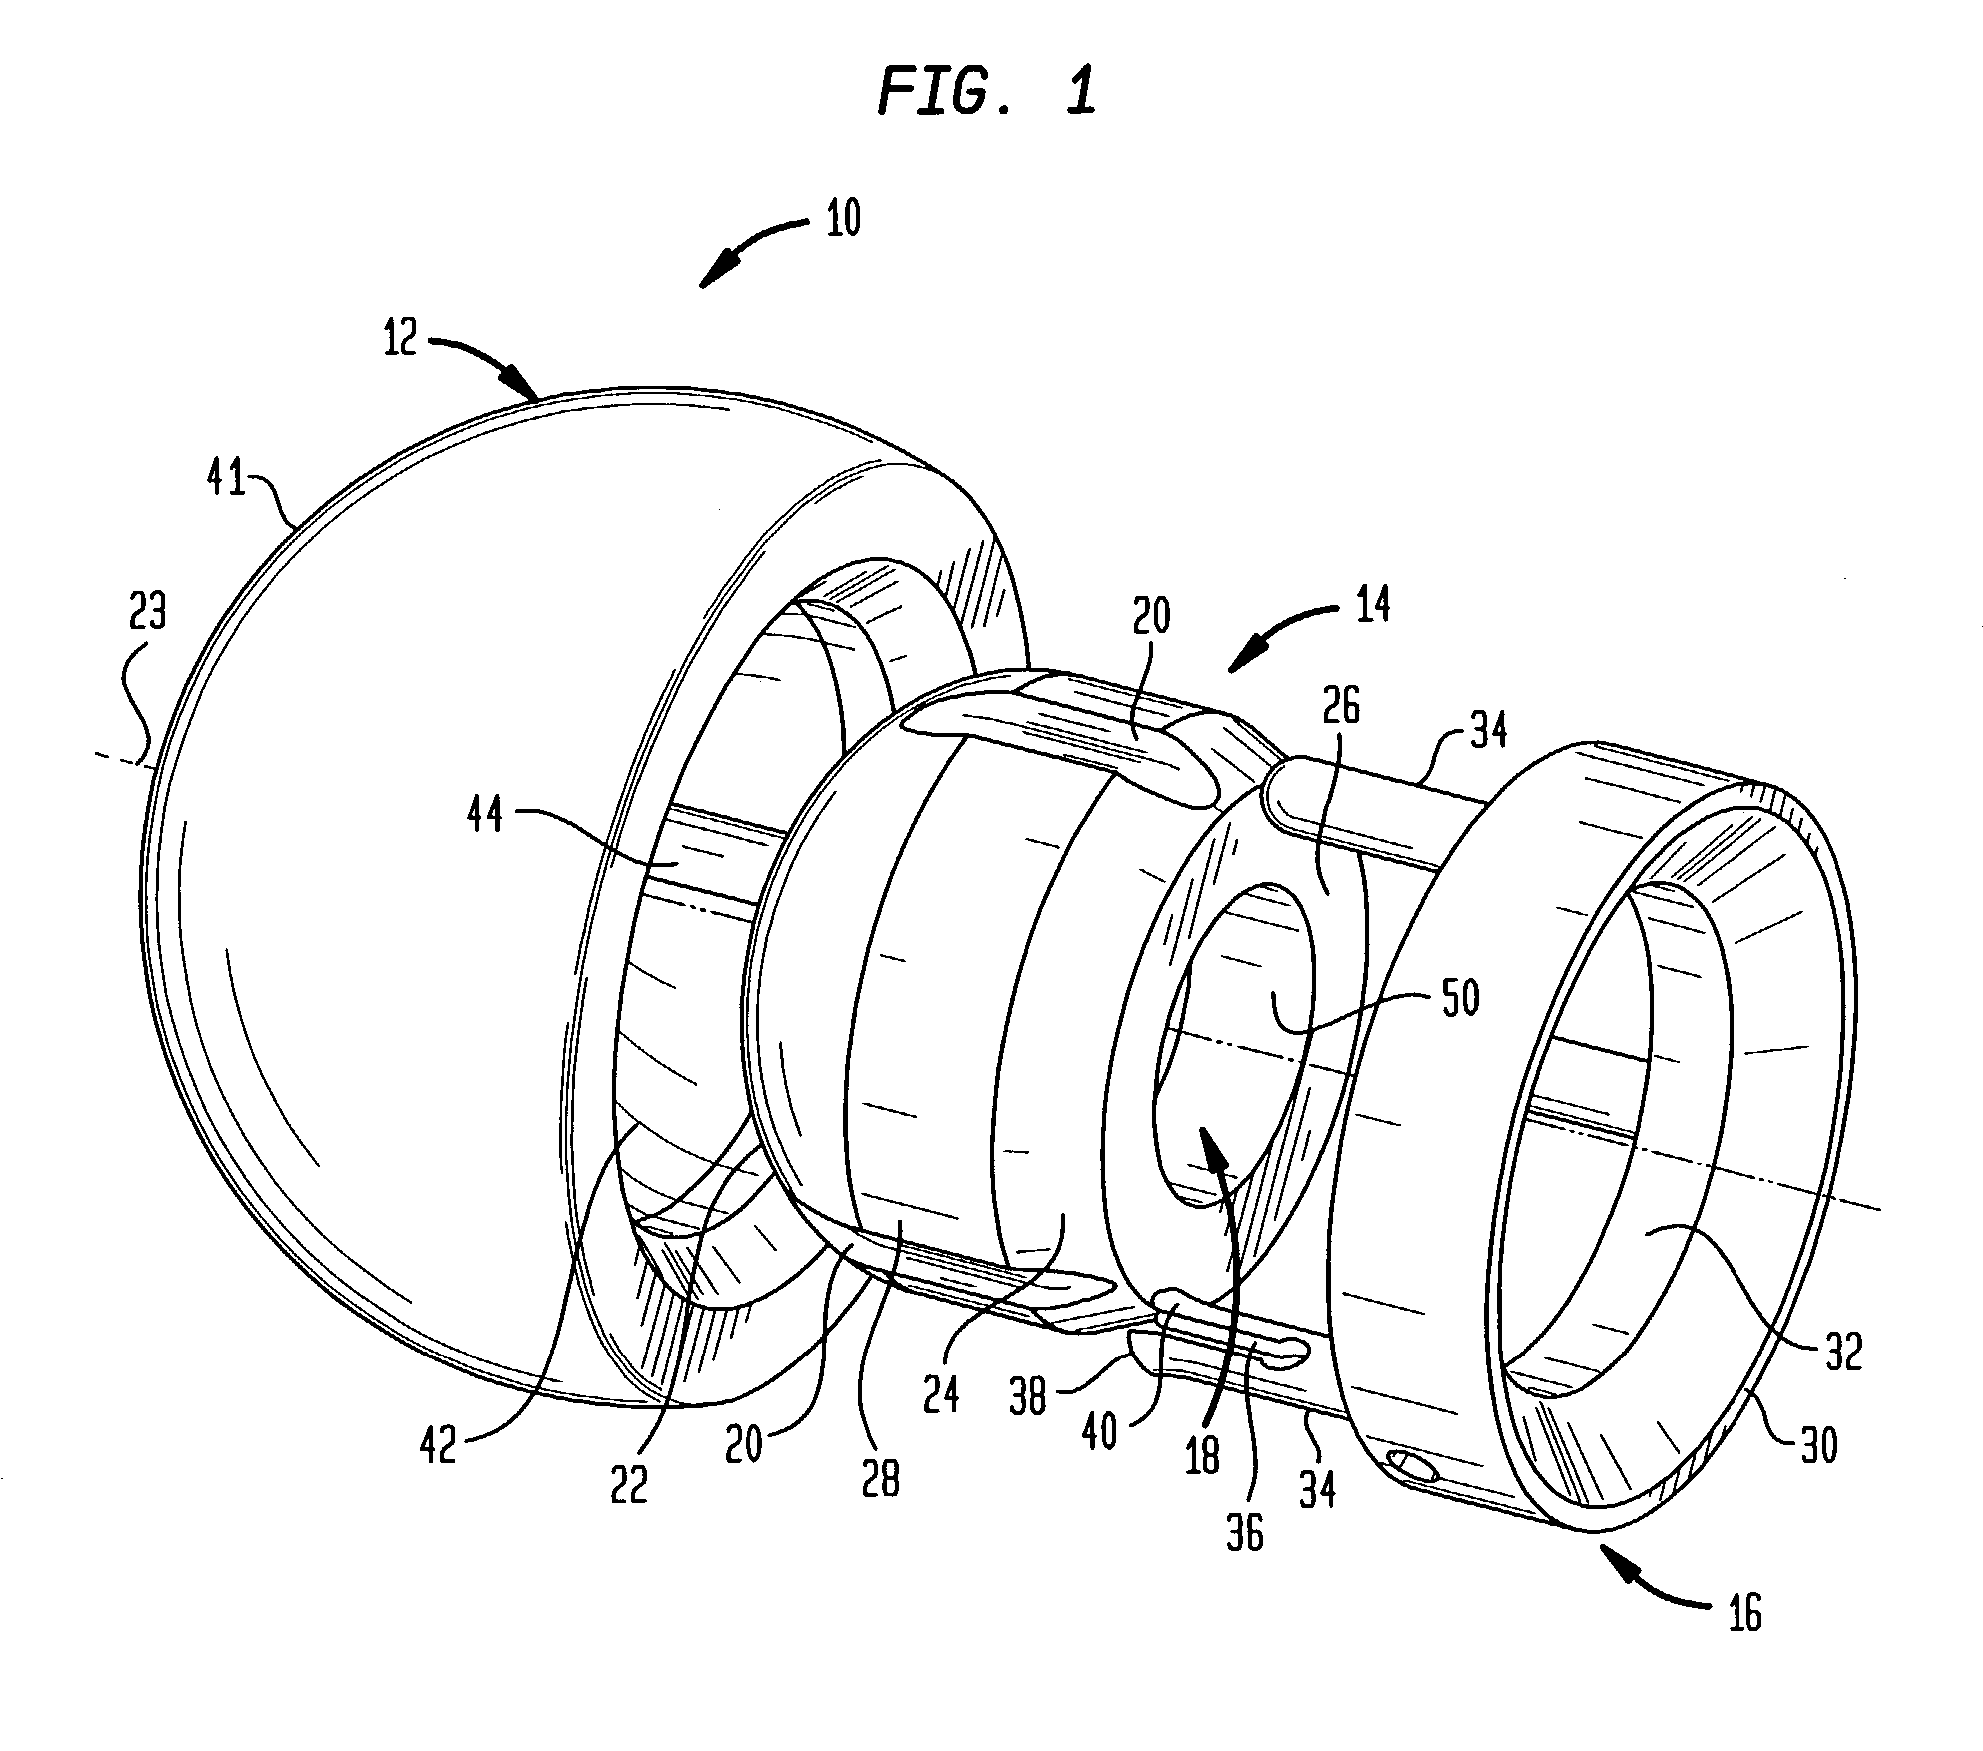 Partially constrained ball and socket